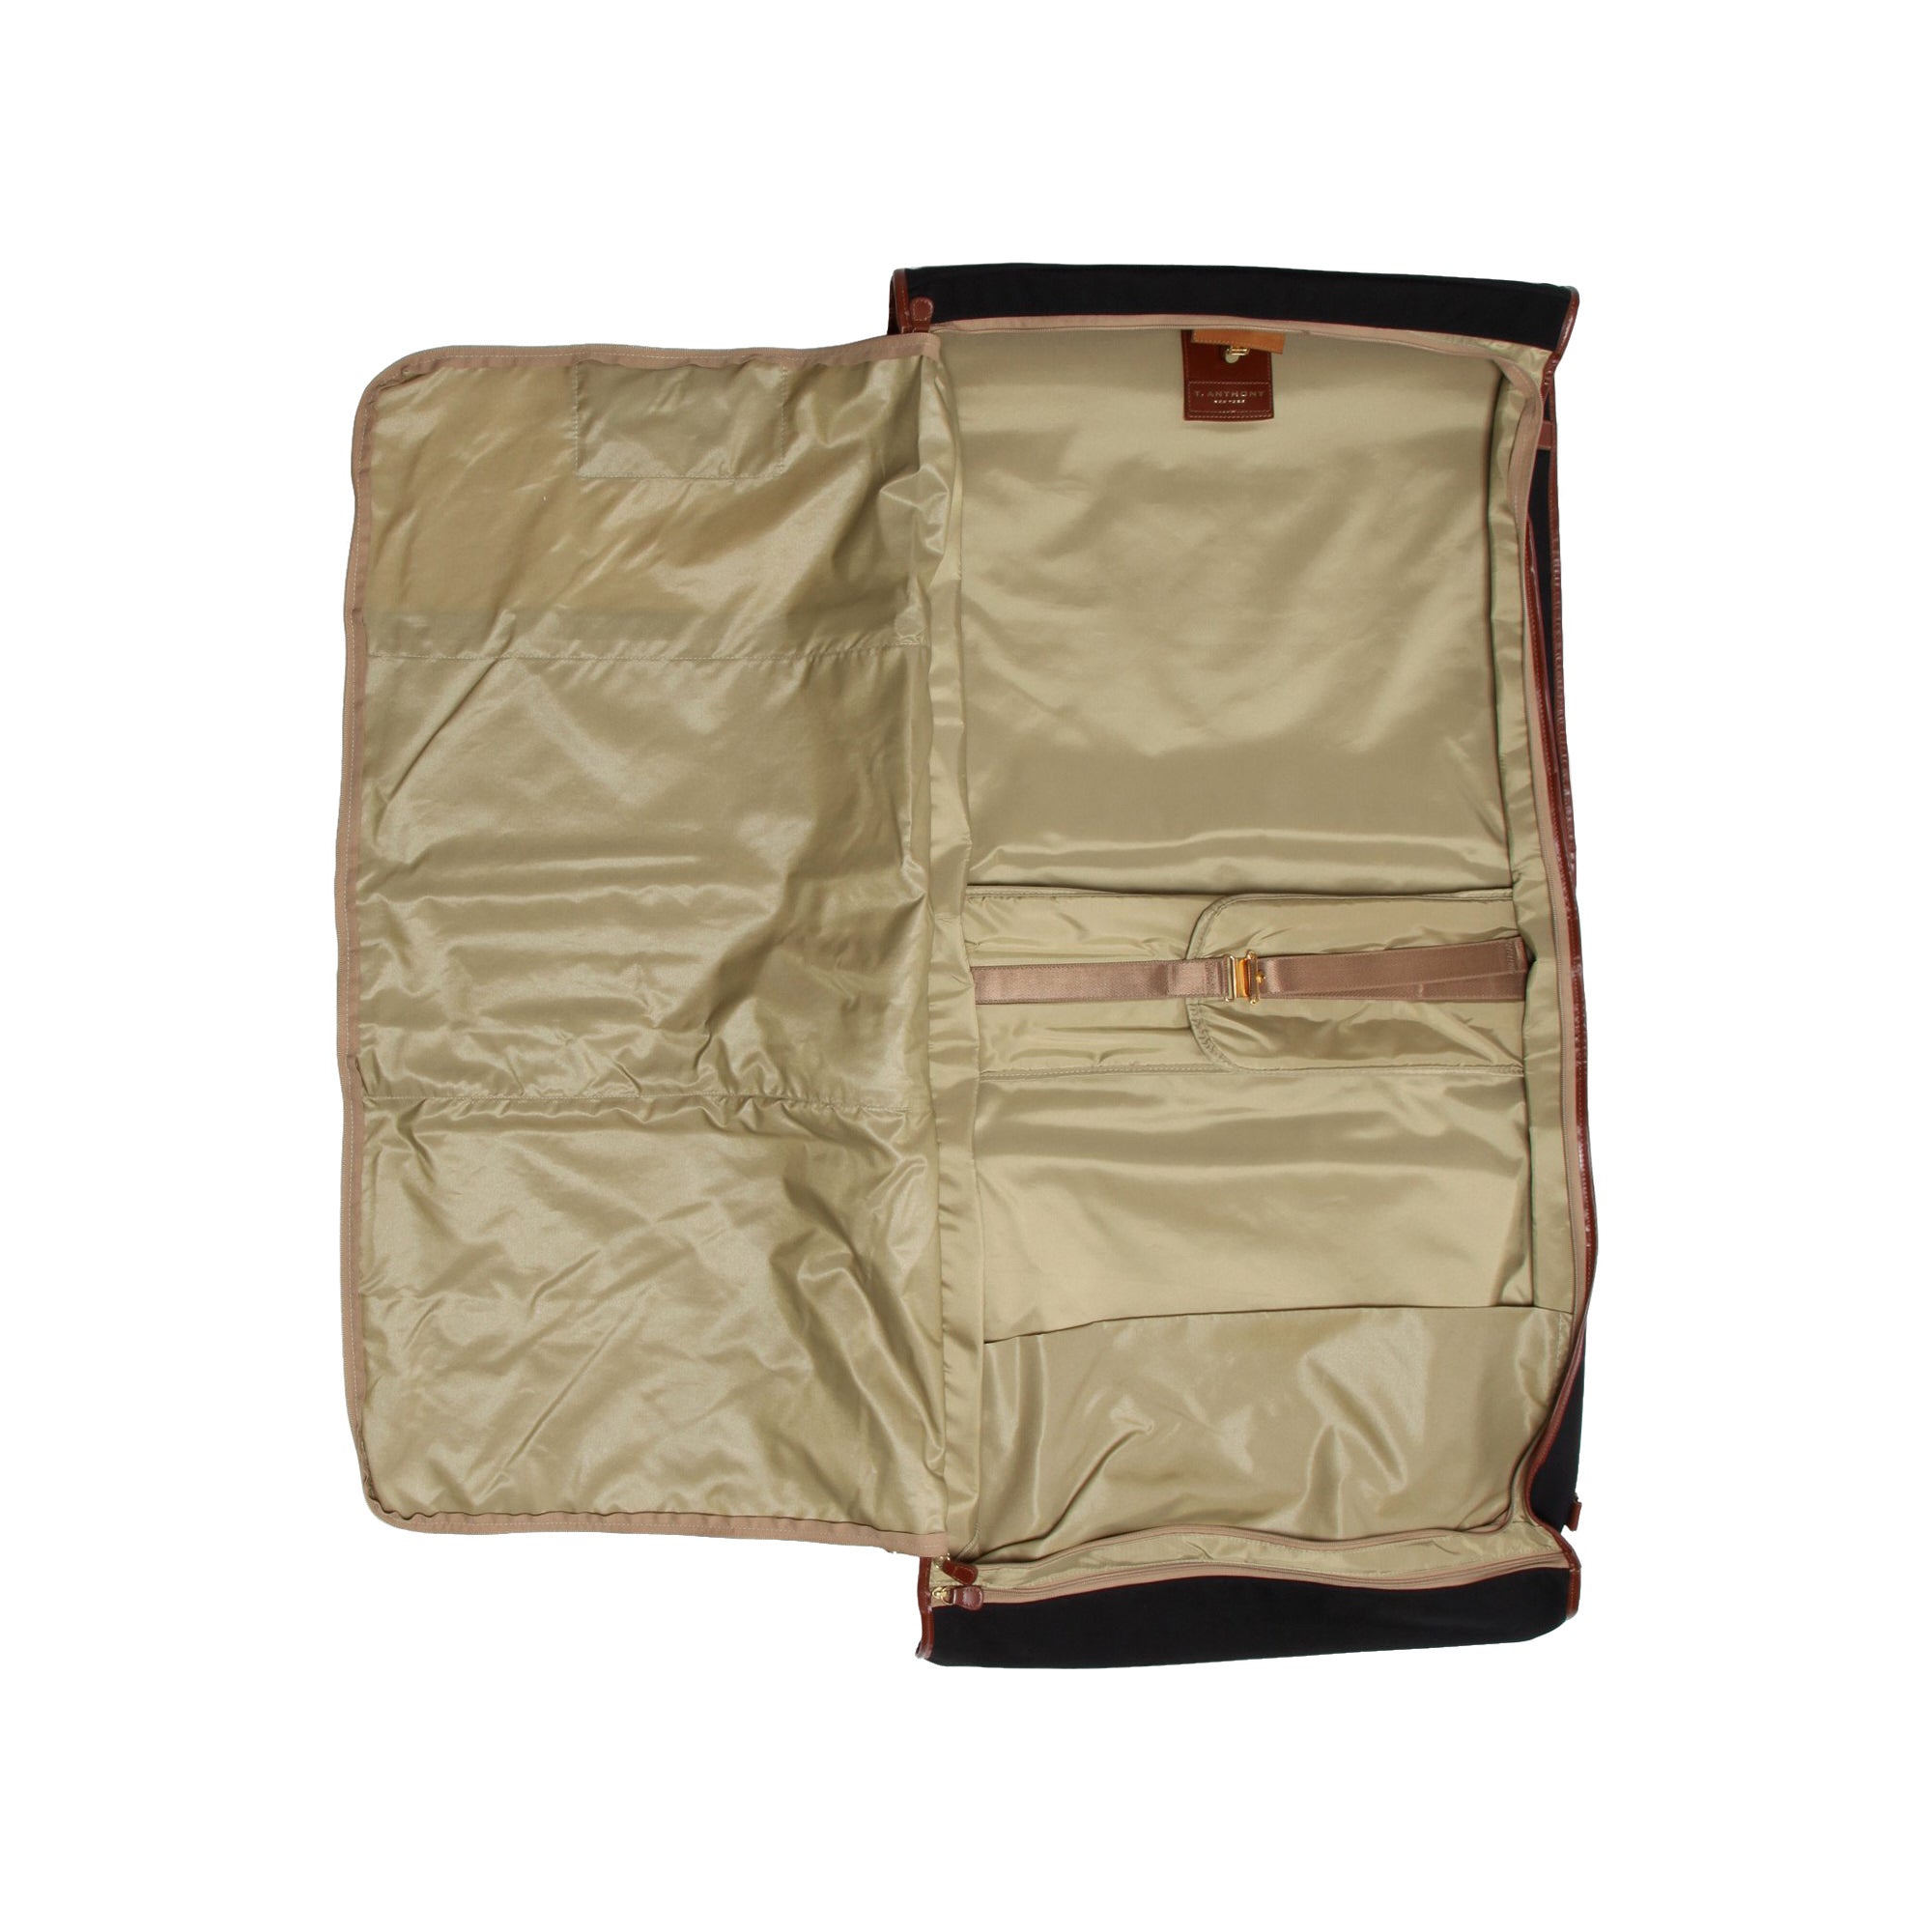 Box of 20 CT4 100% Cotton Canvas Gusseted Garment Bag, Medium Length for 4-5